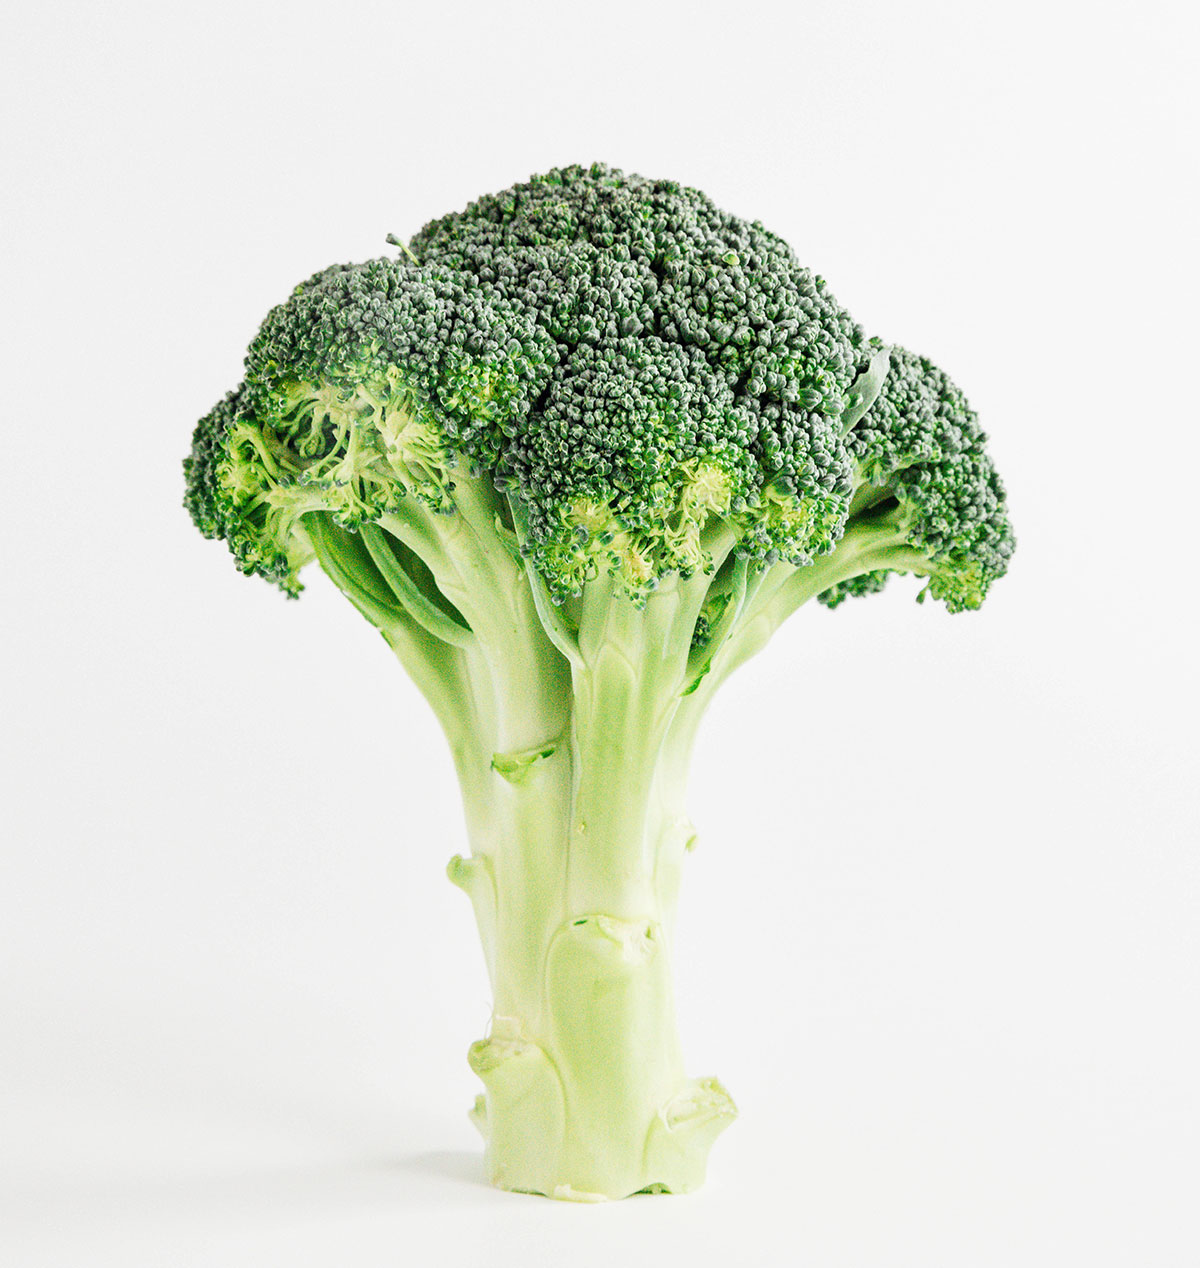 broccoli standing upright on white background